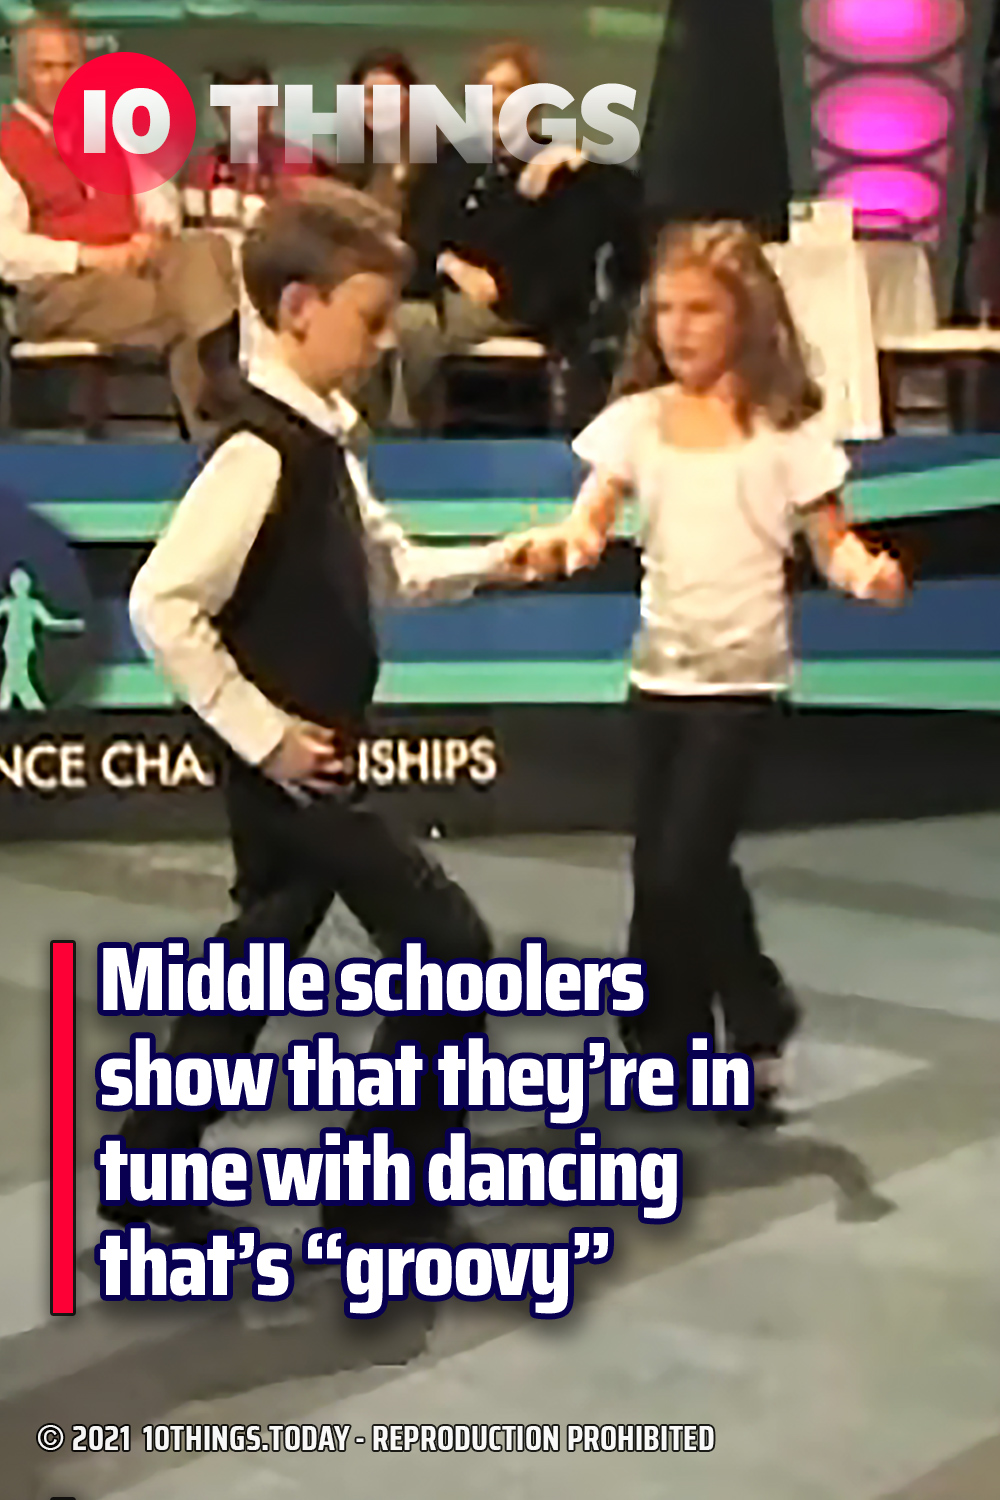 Middle schoolers show that they’re in tune with dancing that’s “groovy”